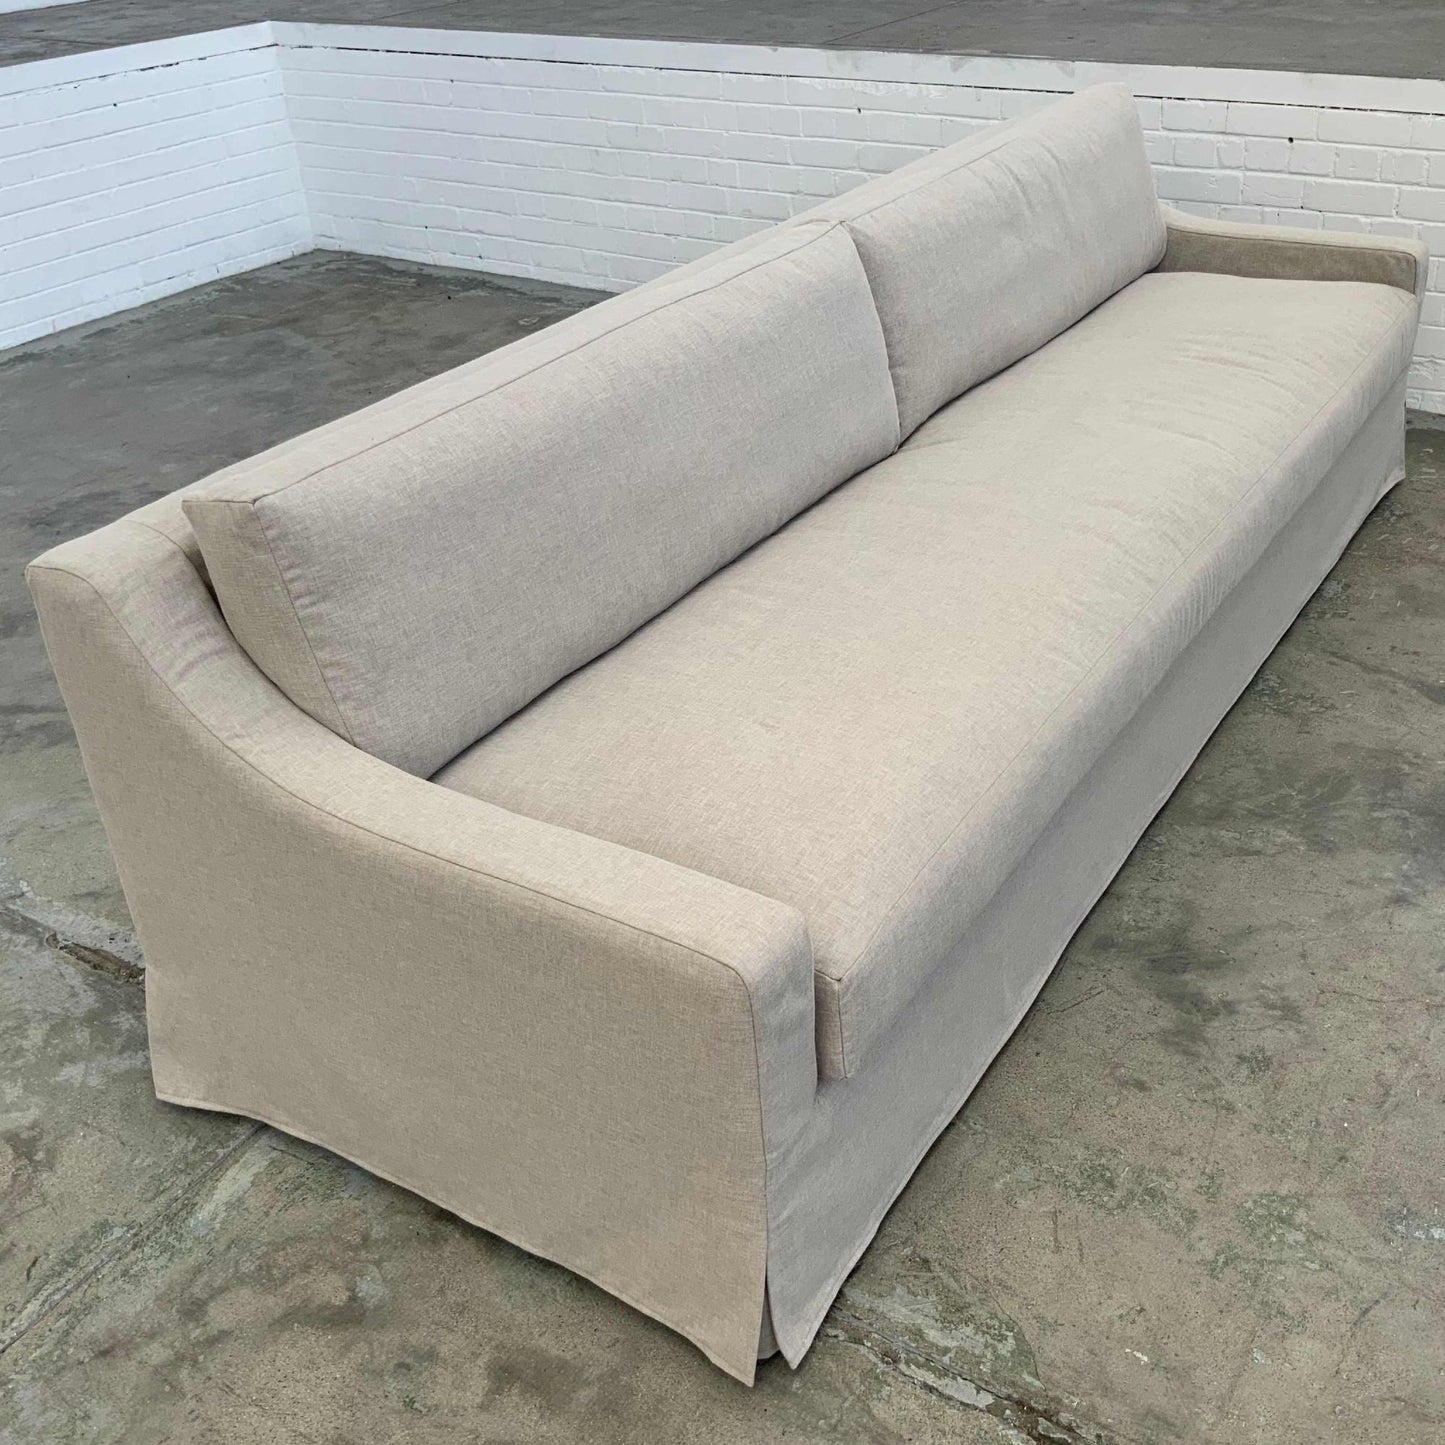 Hillhouse Slip-Cover Sofa | Value Fabrics Range Multiple Sizes And Options Available Made To Order